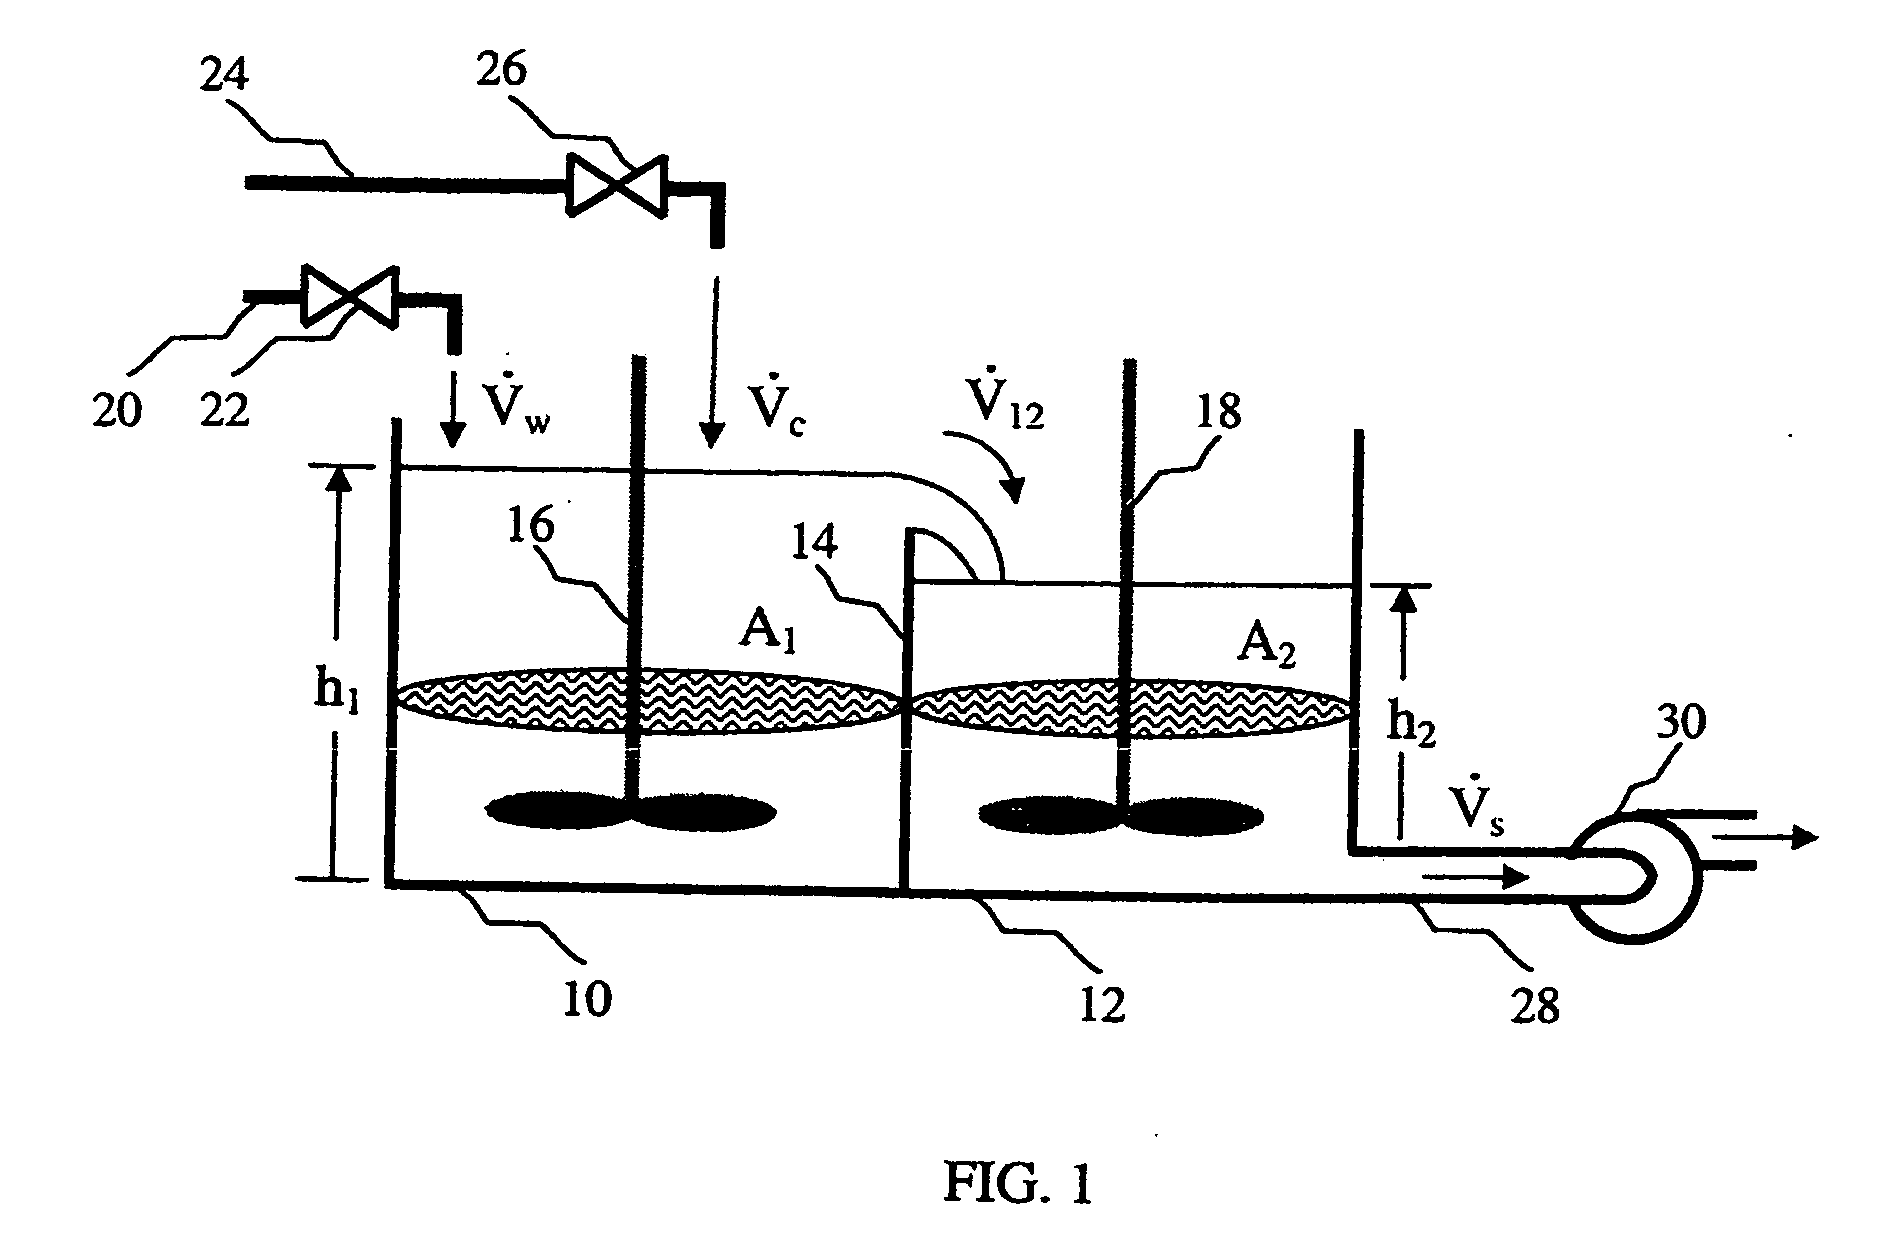 Systems for determining a volumetric ratio of a material to the total materials in a mixing vessel